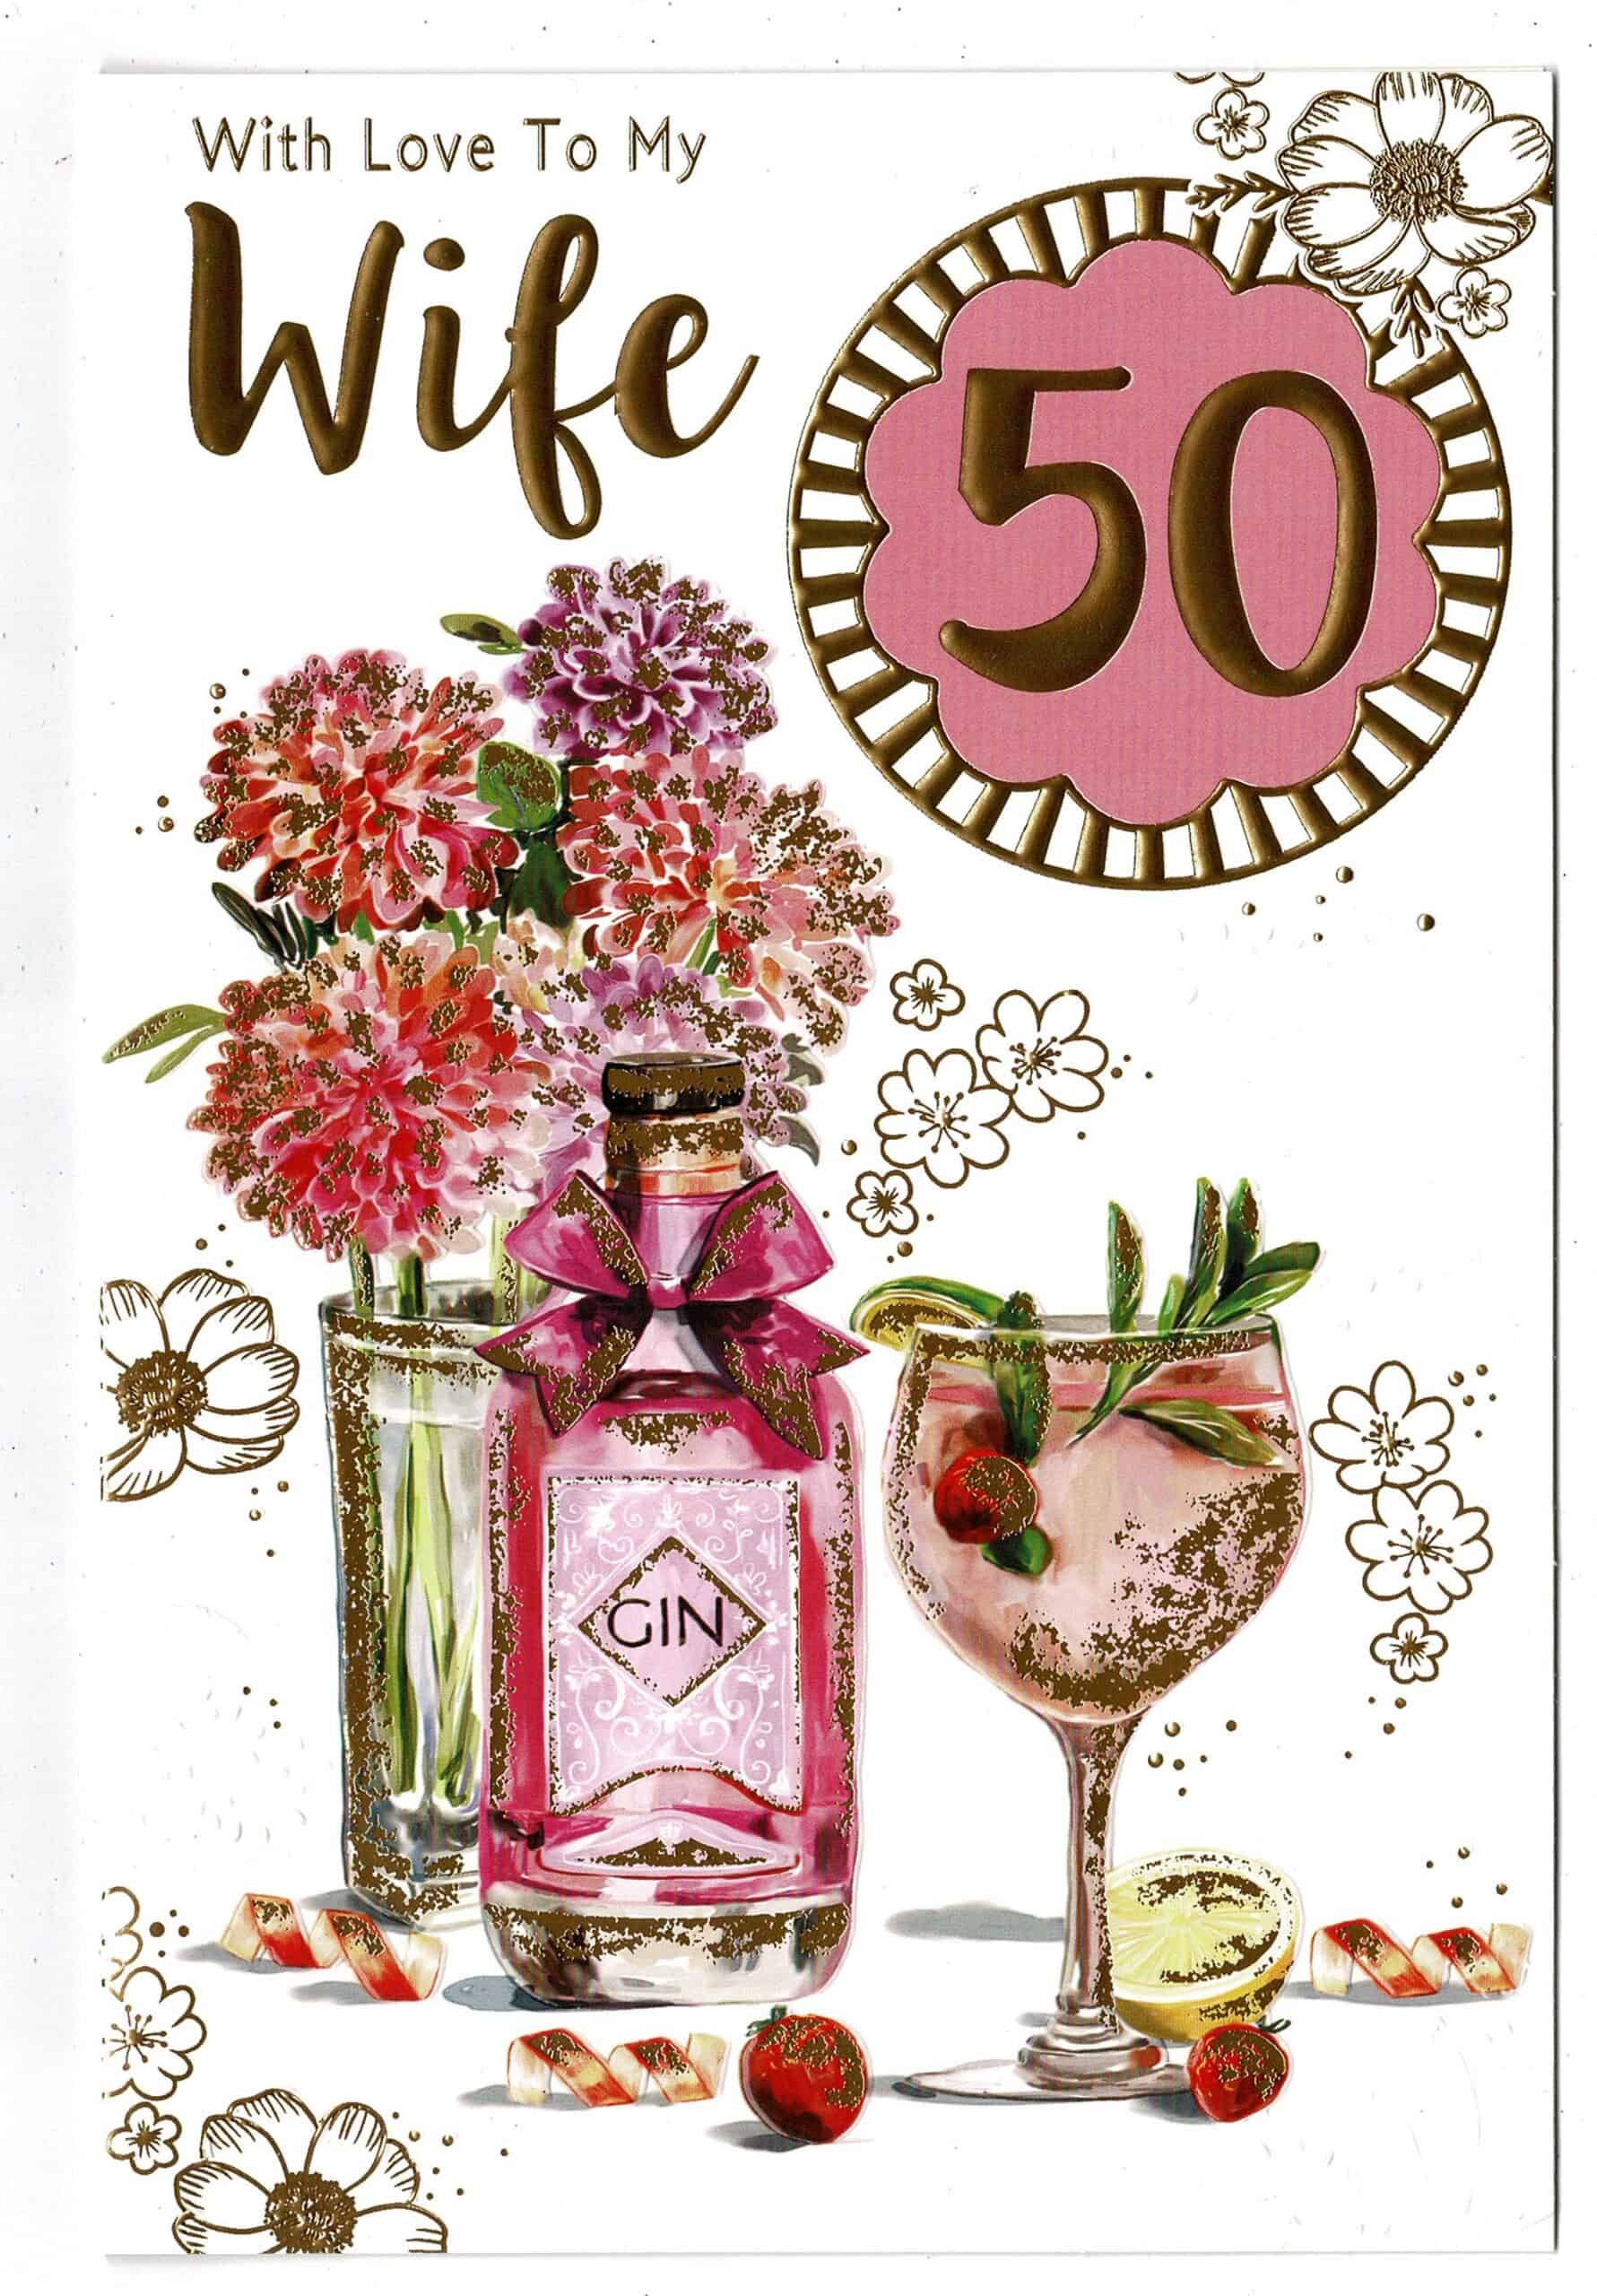 Wife 50th Birthday Card Embossed Floral And Gin Design 16 cm x 23 cm - With Love Gifts & Cards